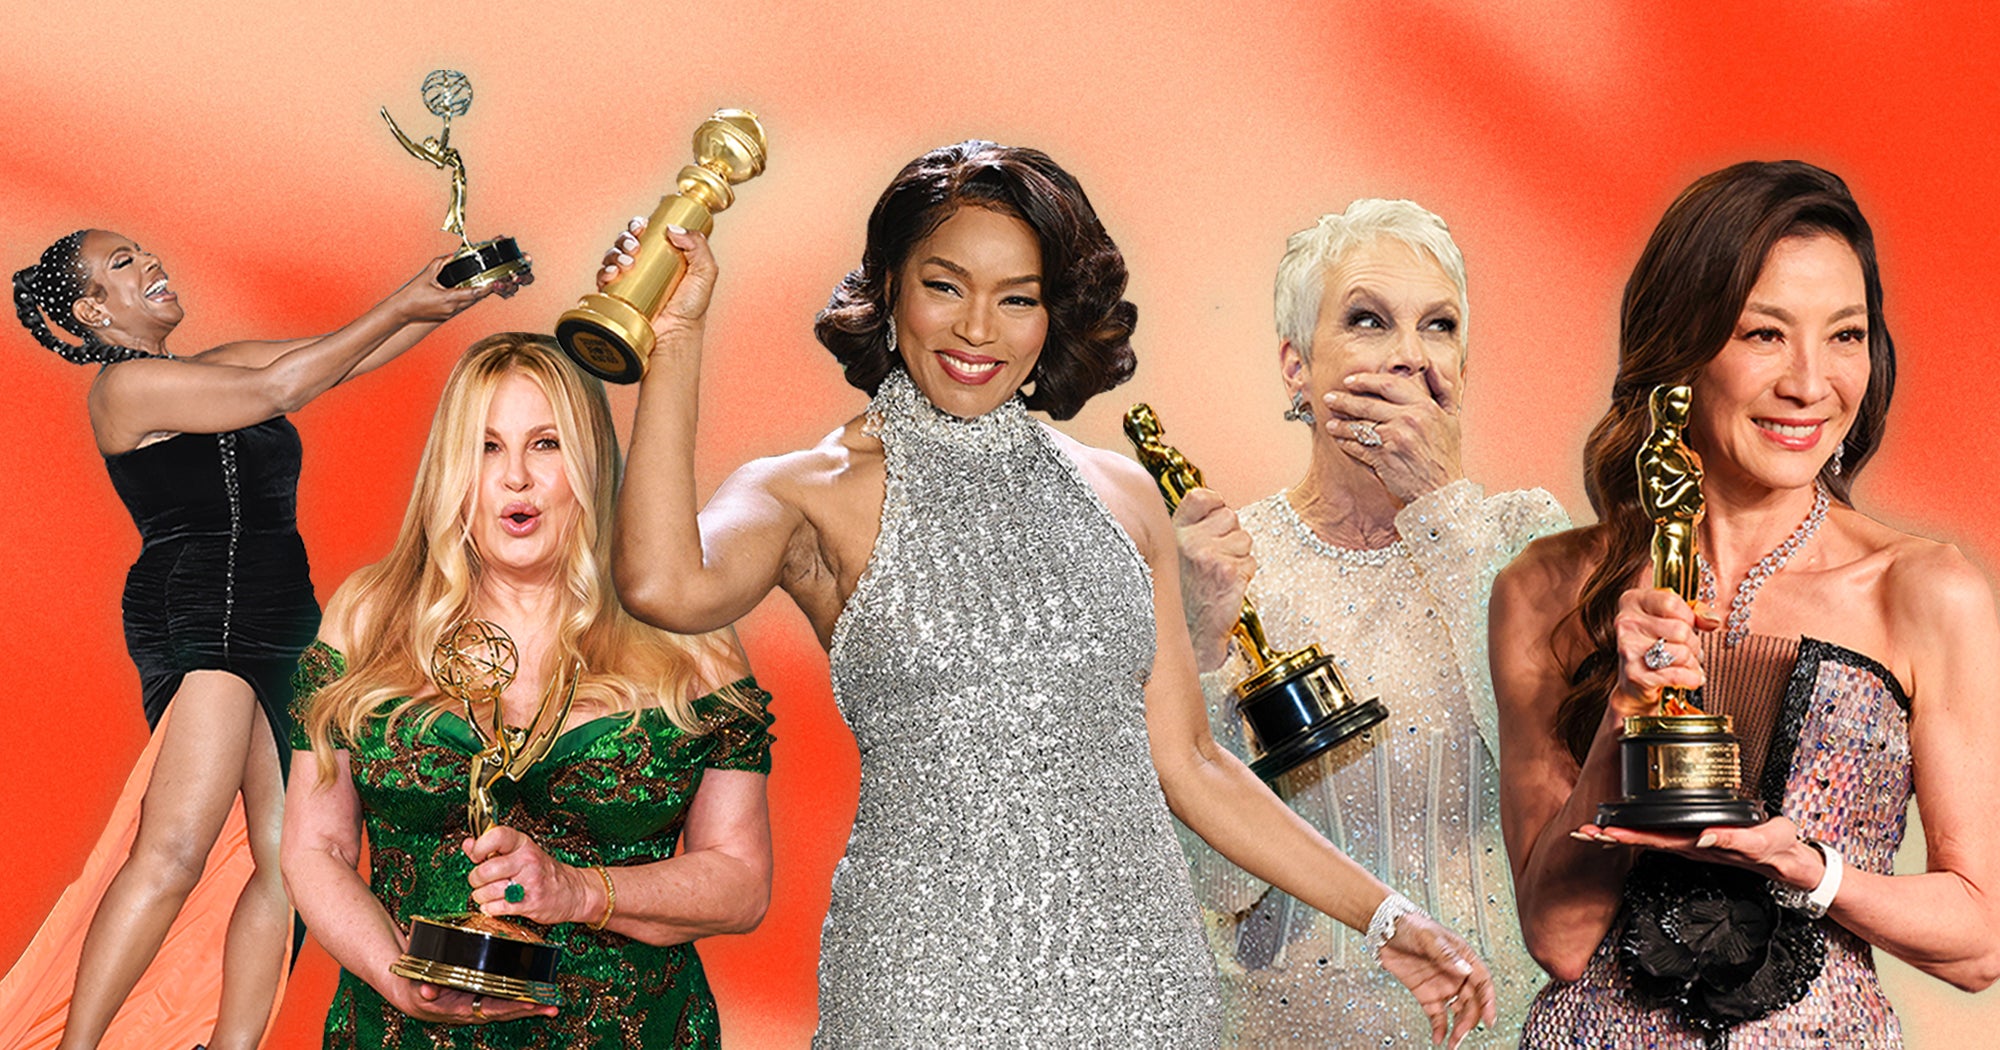 Women over 45 are everywhere on our screens all at once